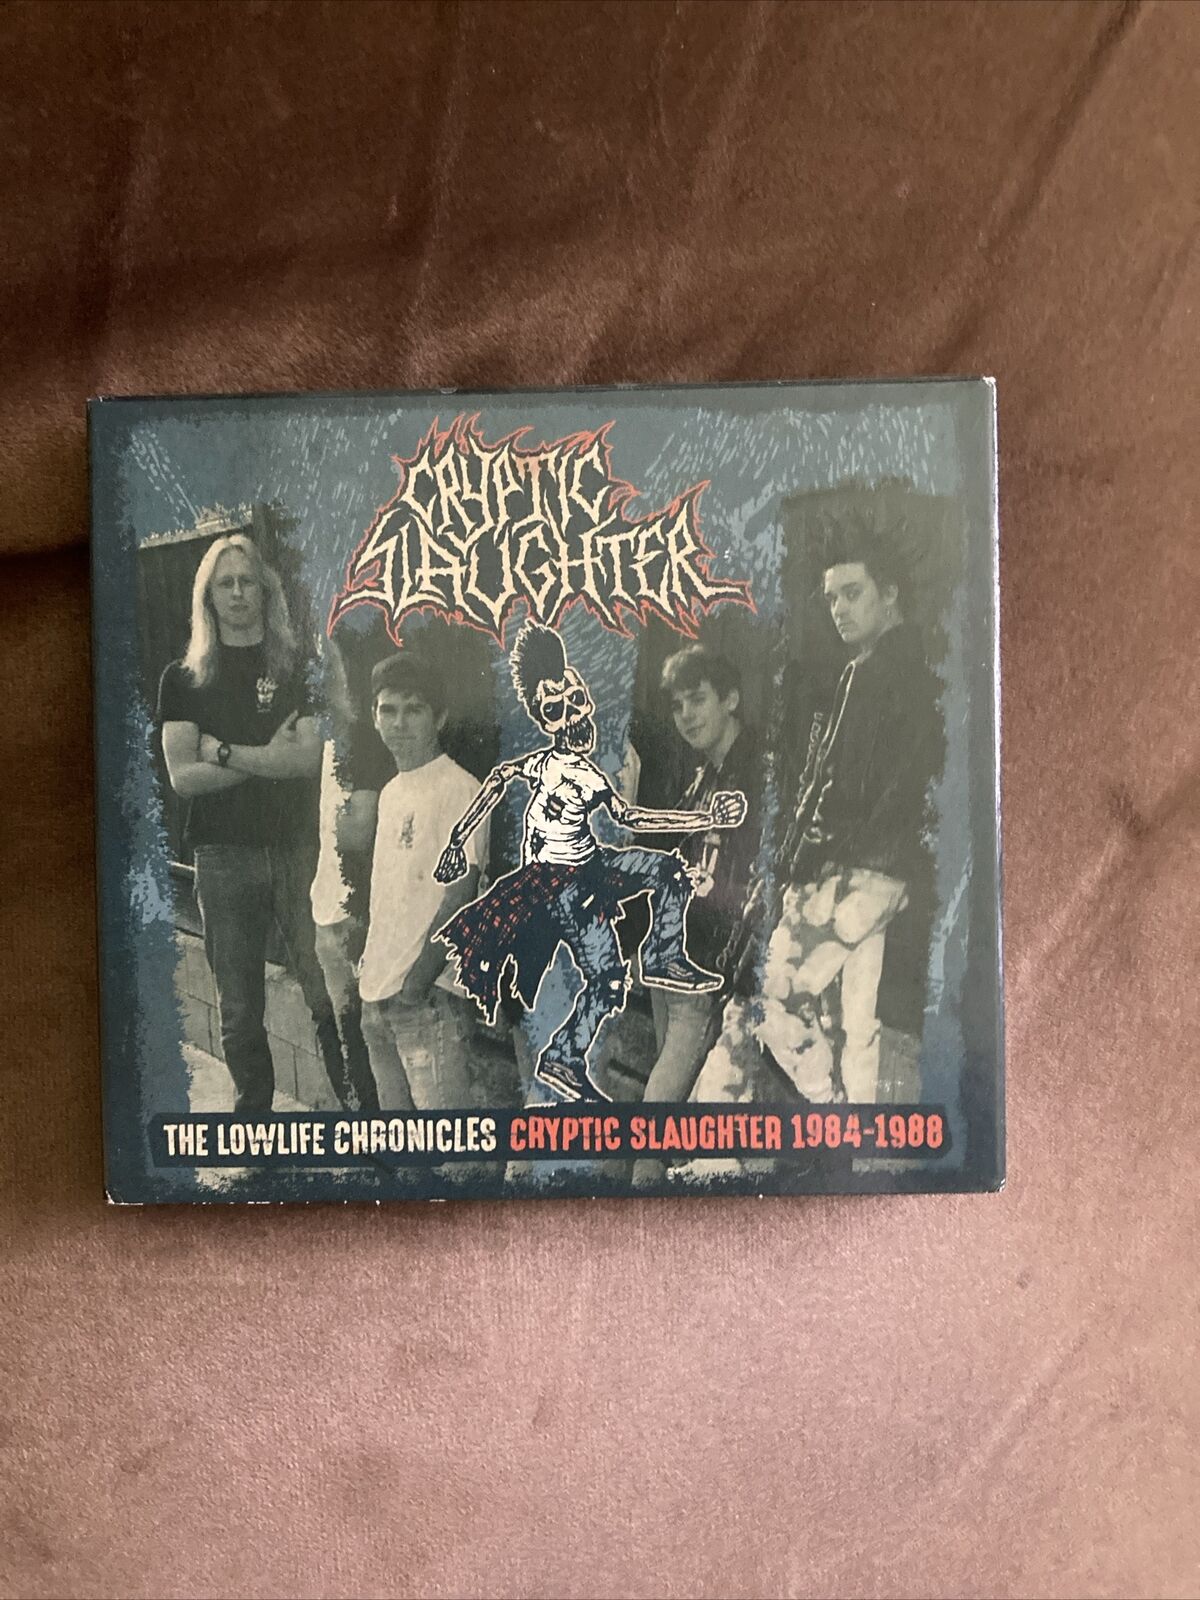 Cryptic Slaughter the lowlife chronicles Cryptic Slaughter 1984-1988